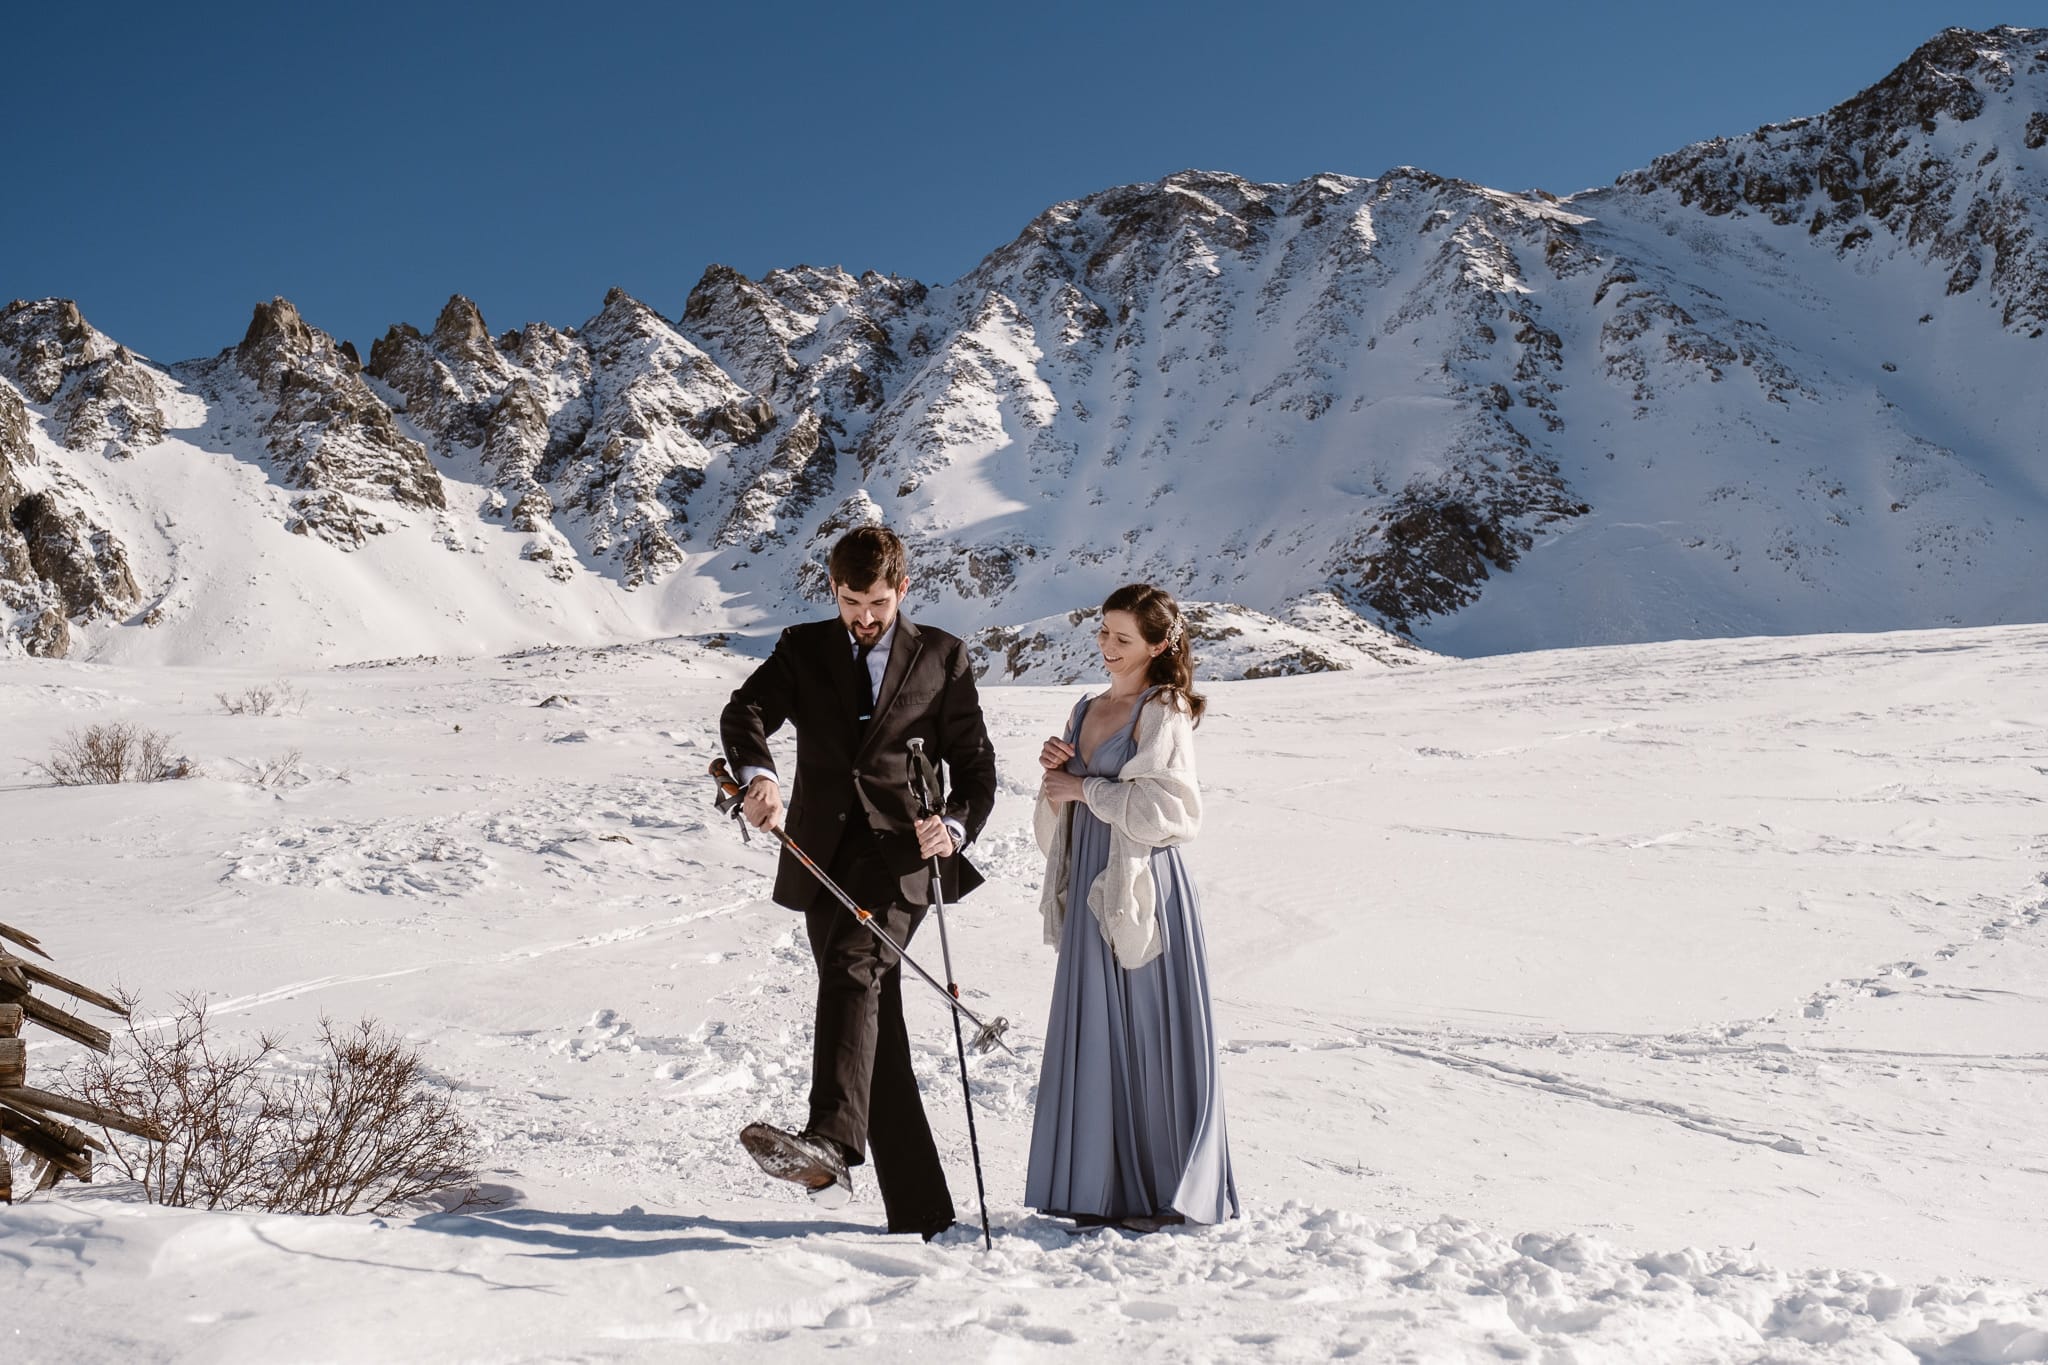 Bride and groom hiking with ski poles in snow, winter backcountry skiing elopement in Colorado mountains, adventure elopement photography